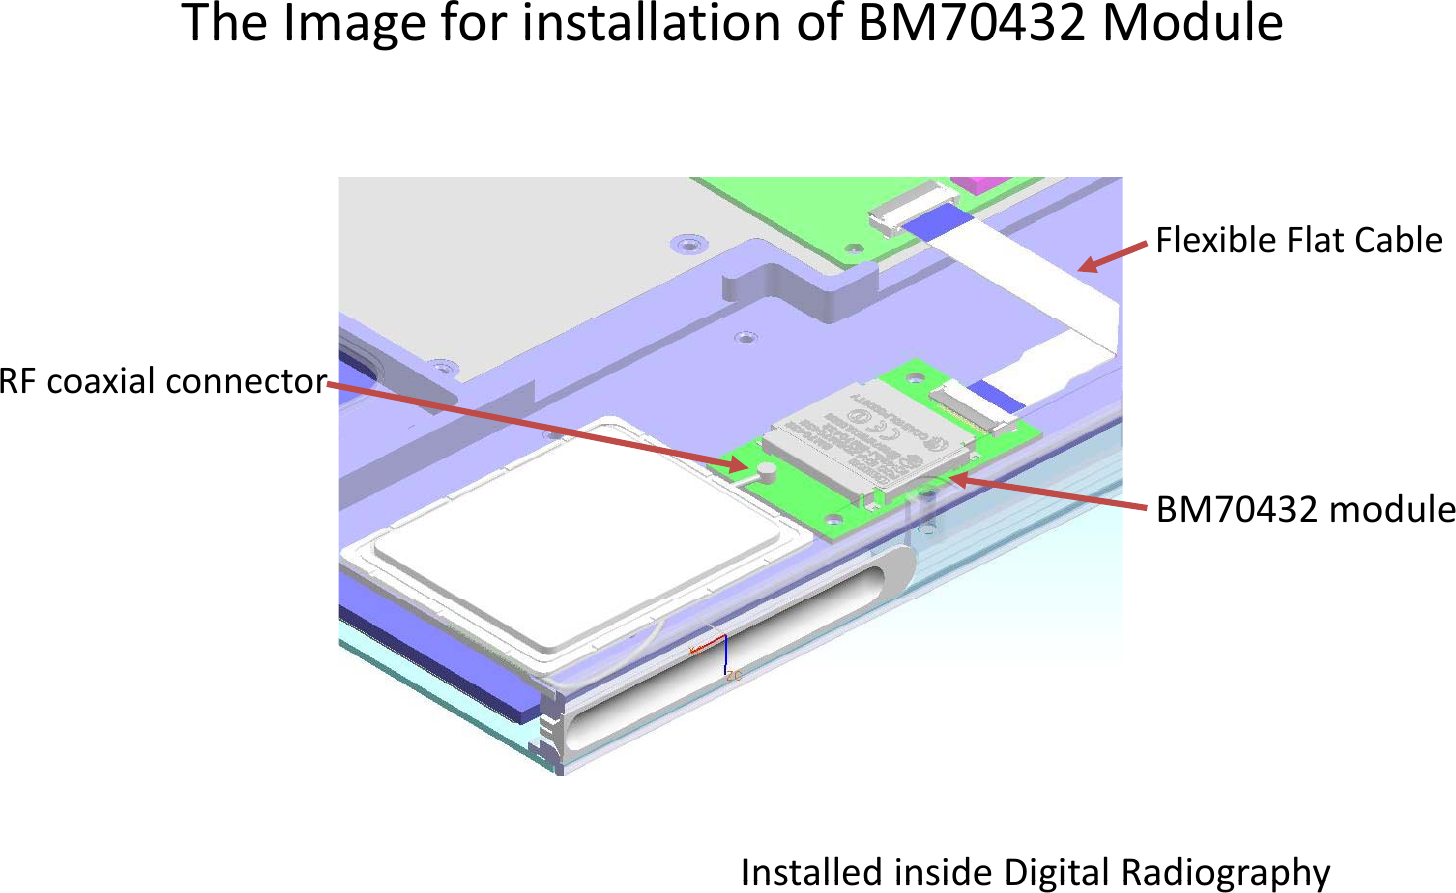 The Image for installation of BM70432 ModuleTheImageforinstallationofBM70432ModuleFlexible FlatCableRFcoaxialconnectorBM70432moduleInstalled inside Digital RadiographyInstalledinsideDigitalRadiography